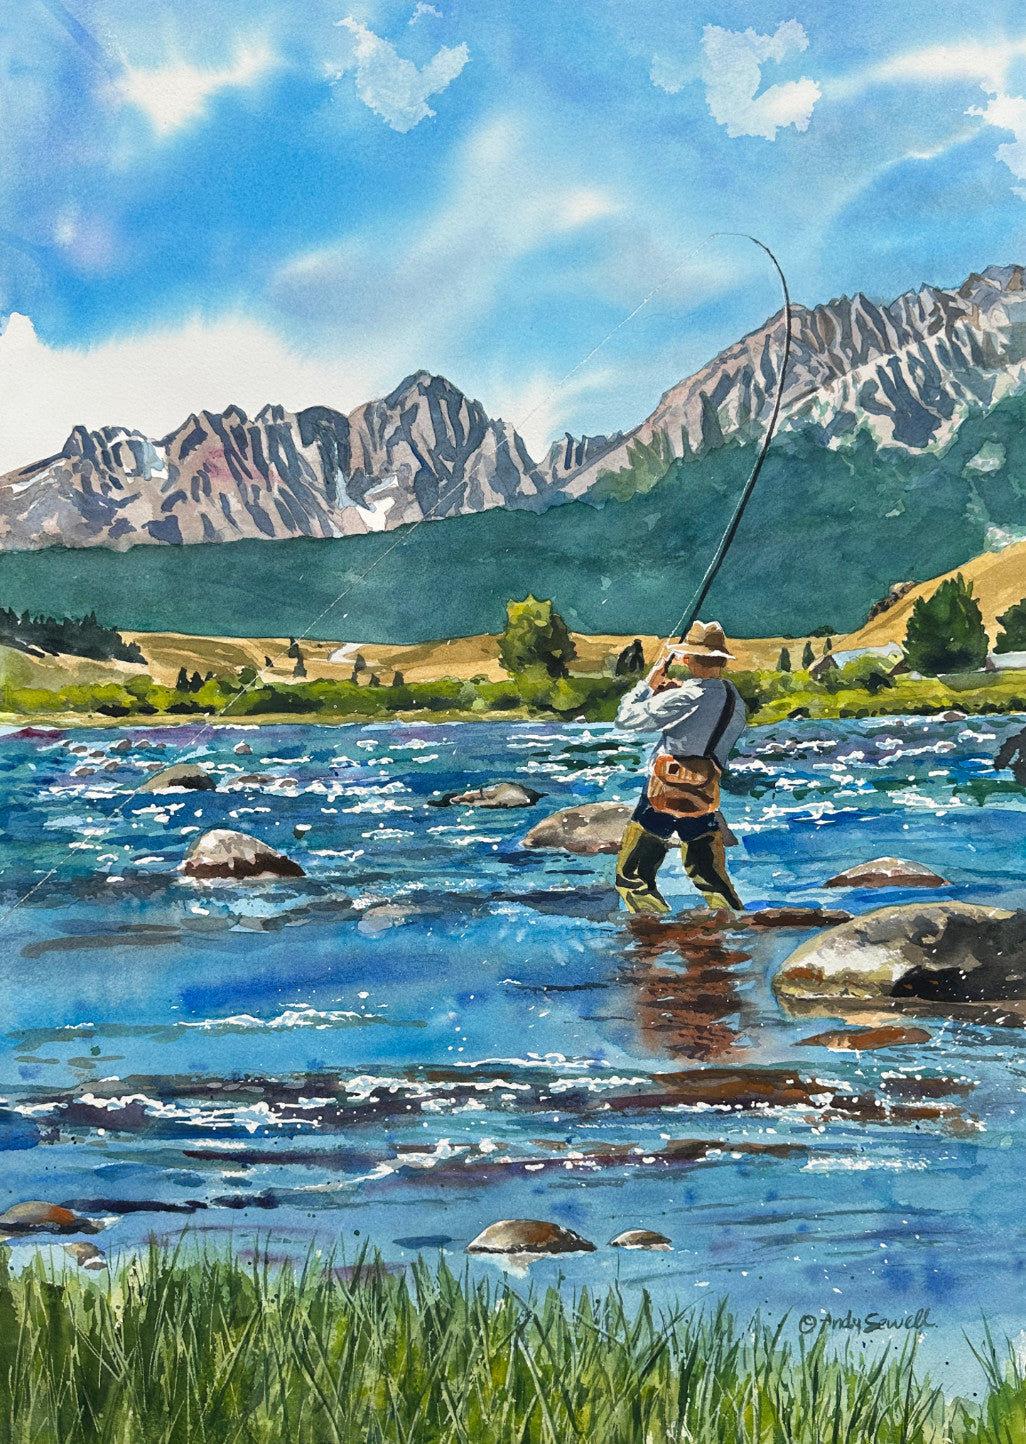 Tight Lines - an Original Watercolor Painting or Open Edition Print of a  Fly-fisherman on Idaho's upper Salmon River.